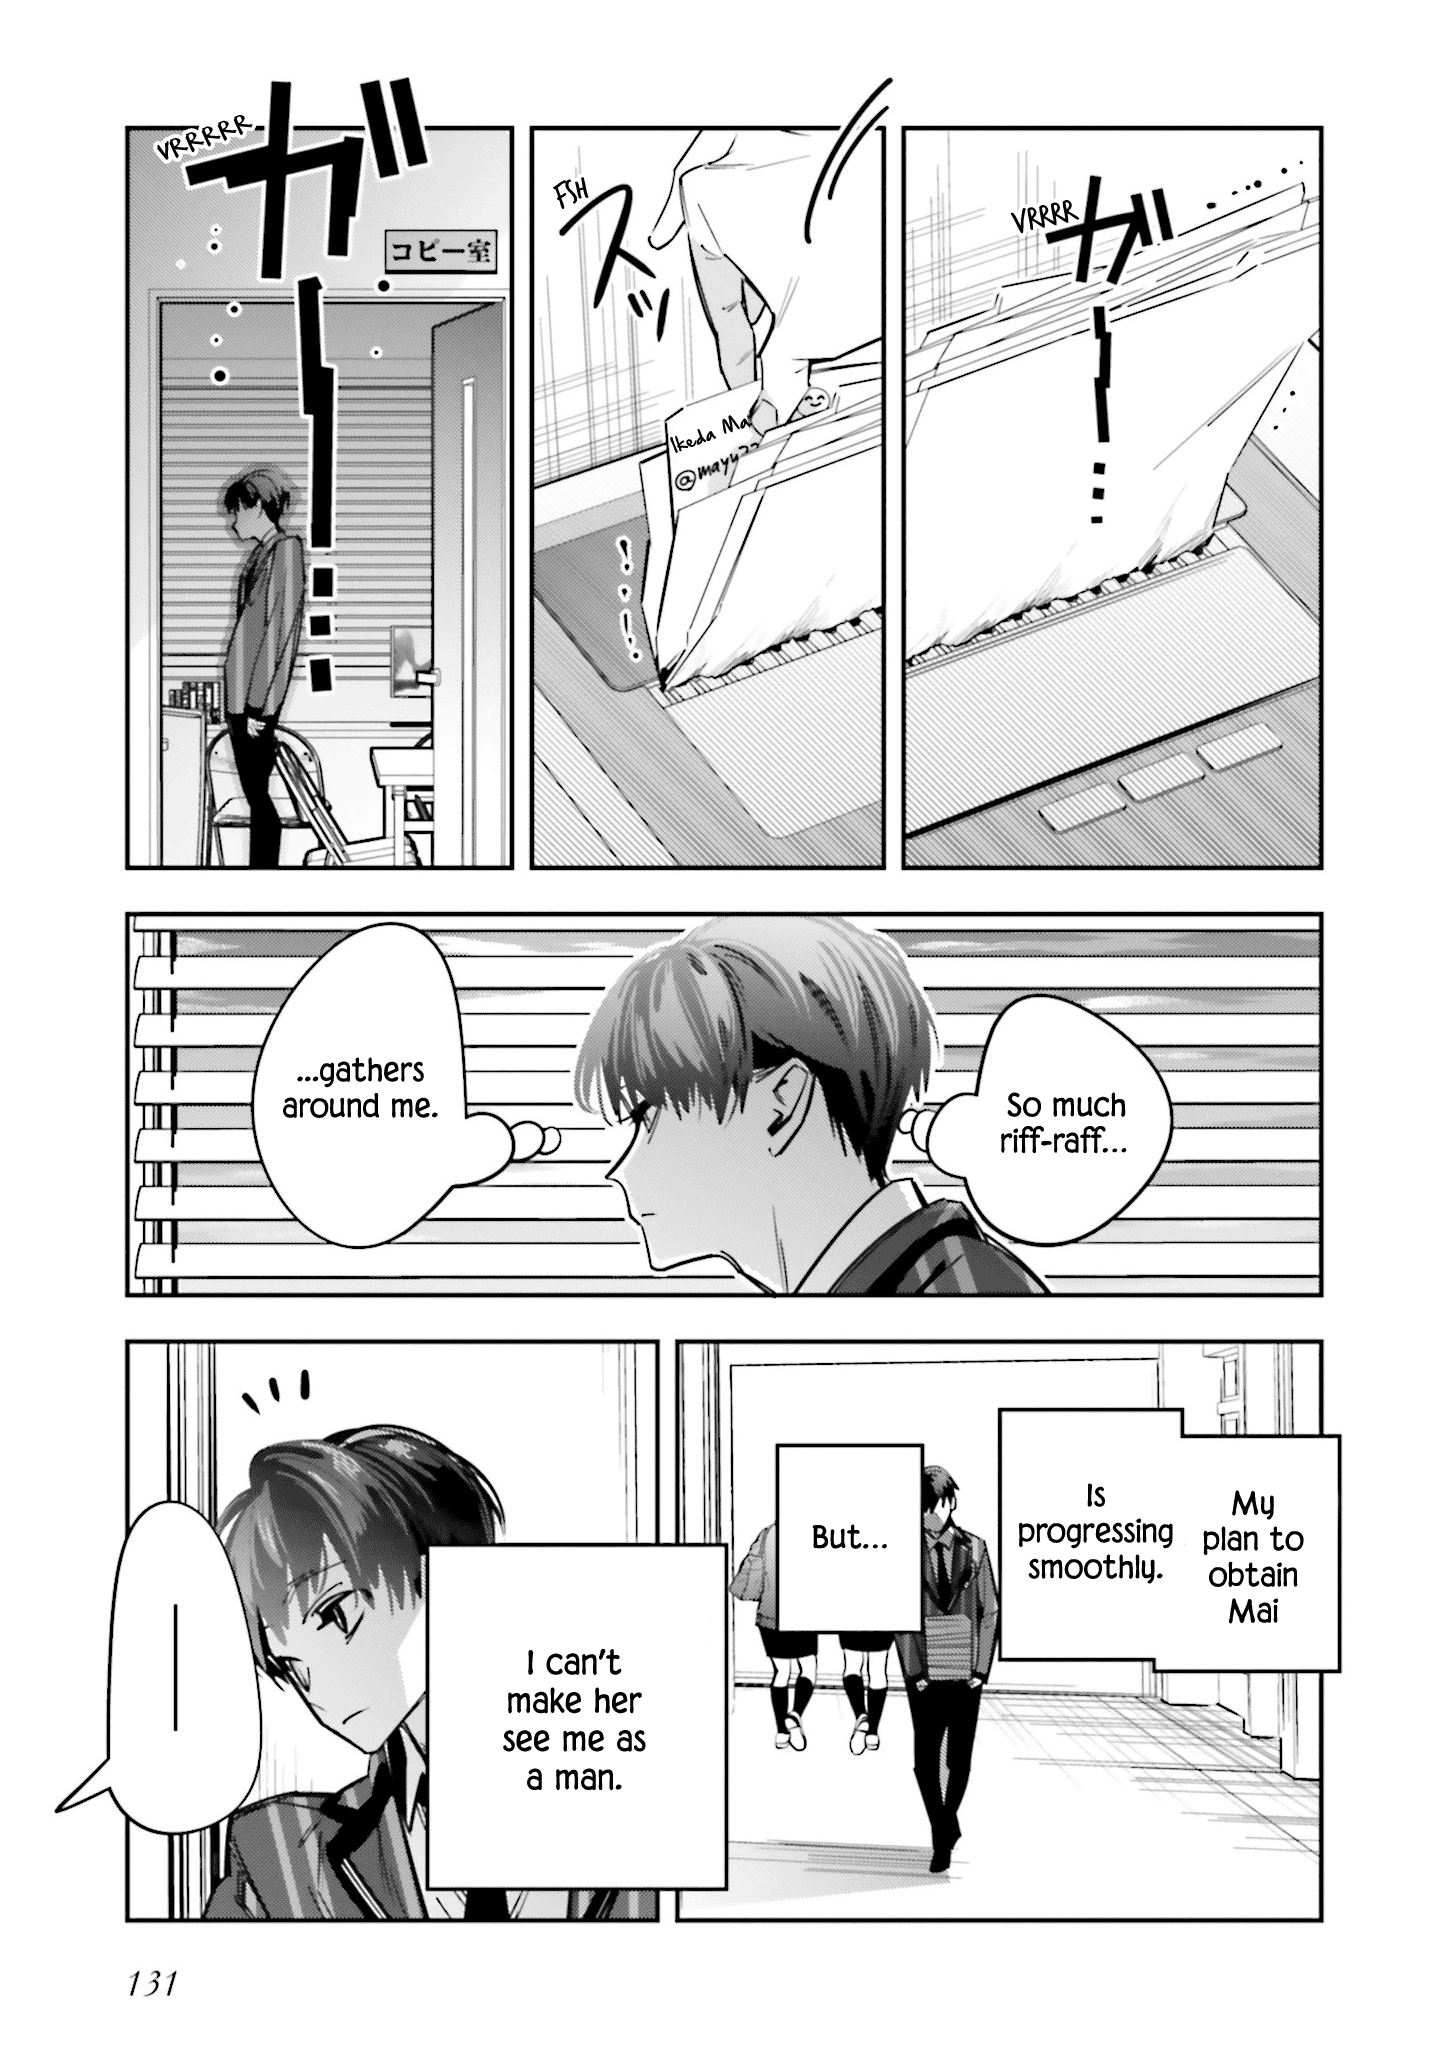 I Reincarnated As The Little Sister Of A Death Game Manga's Murder Mastermind And Failed Chapter 9 #13